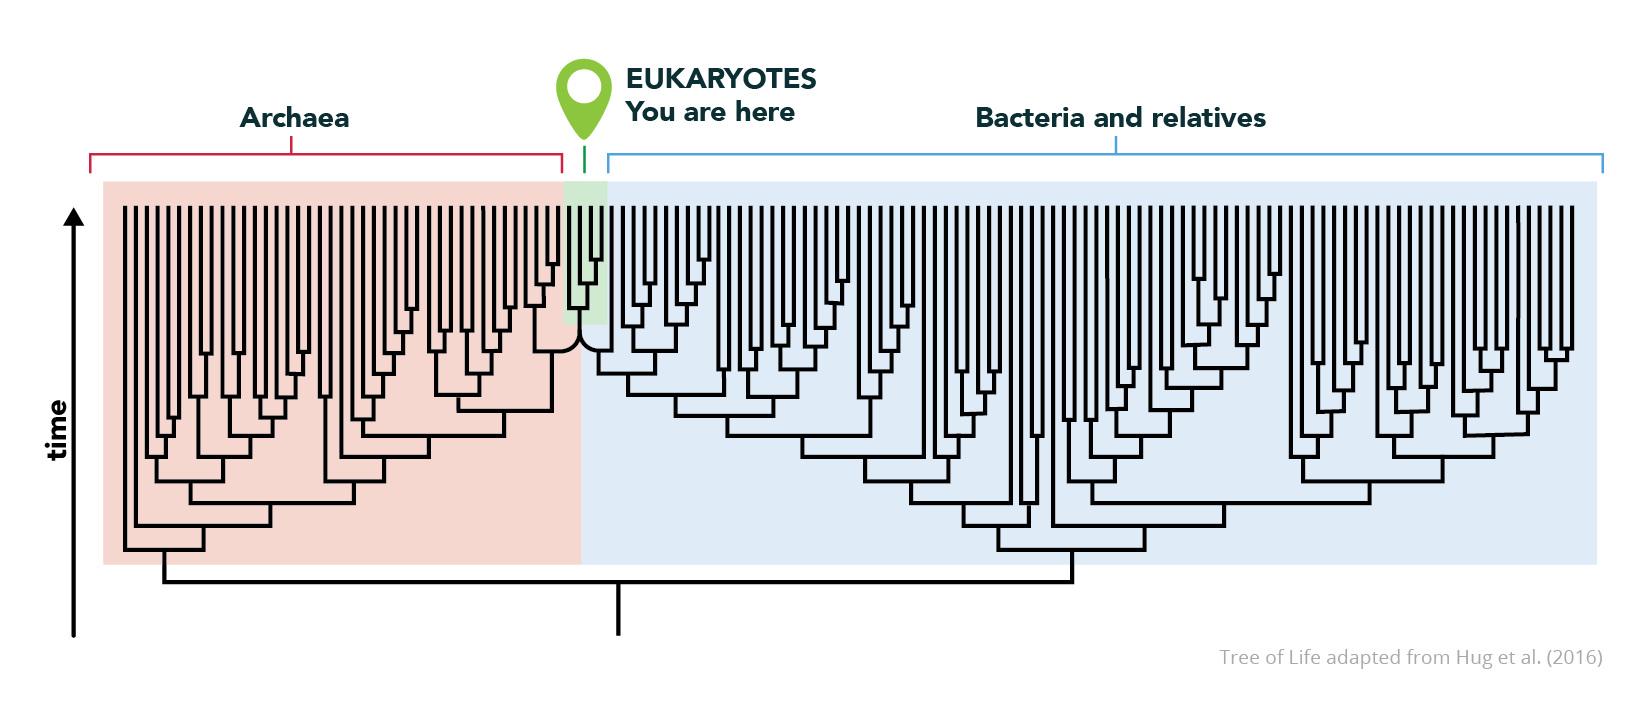 Large evolutionary tree showing Bacteria and relatives, Archaea, and Eukaryotes. Eukaryotes is highlighted green, is the smallest of the groups, and has a label stating "You are here."